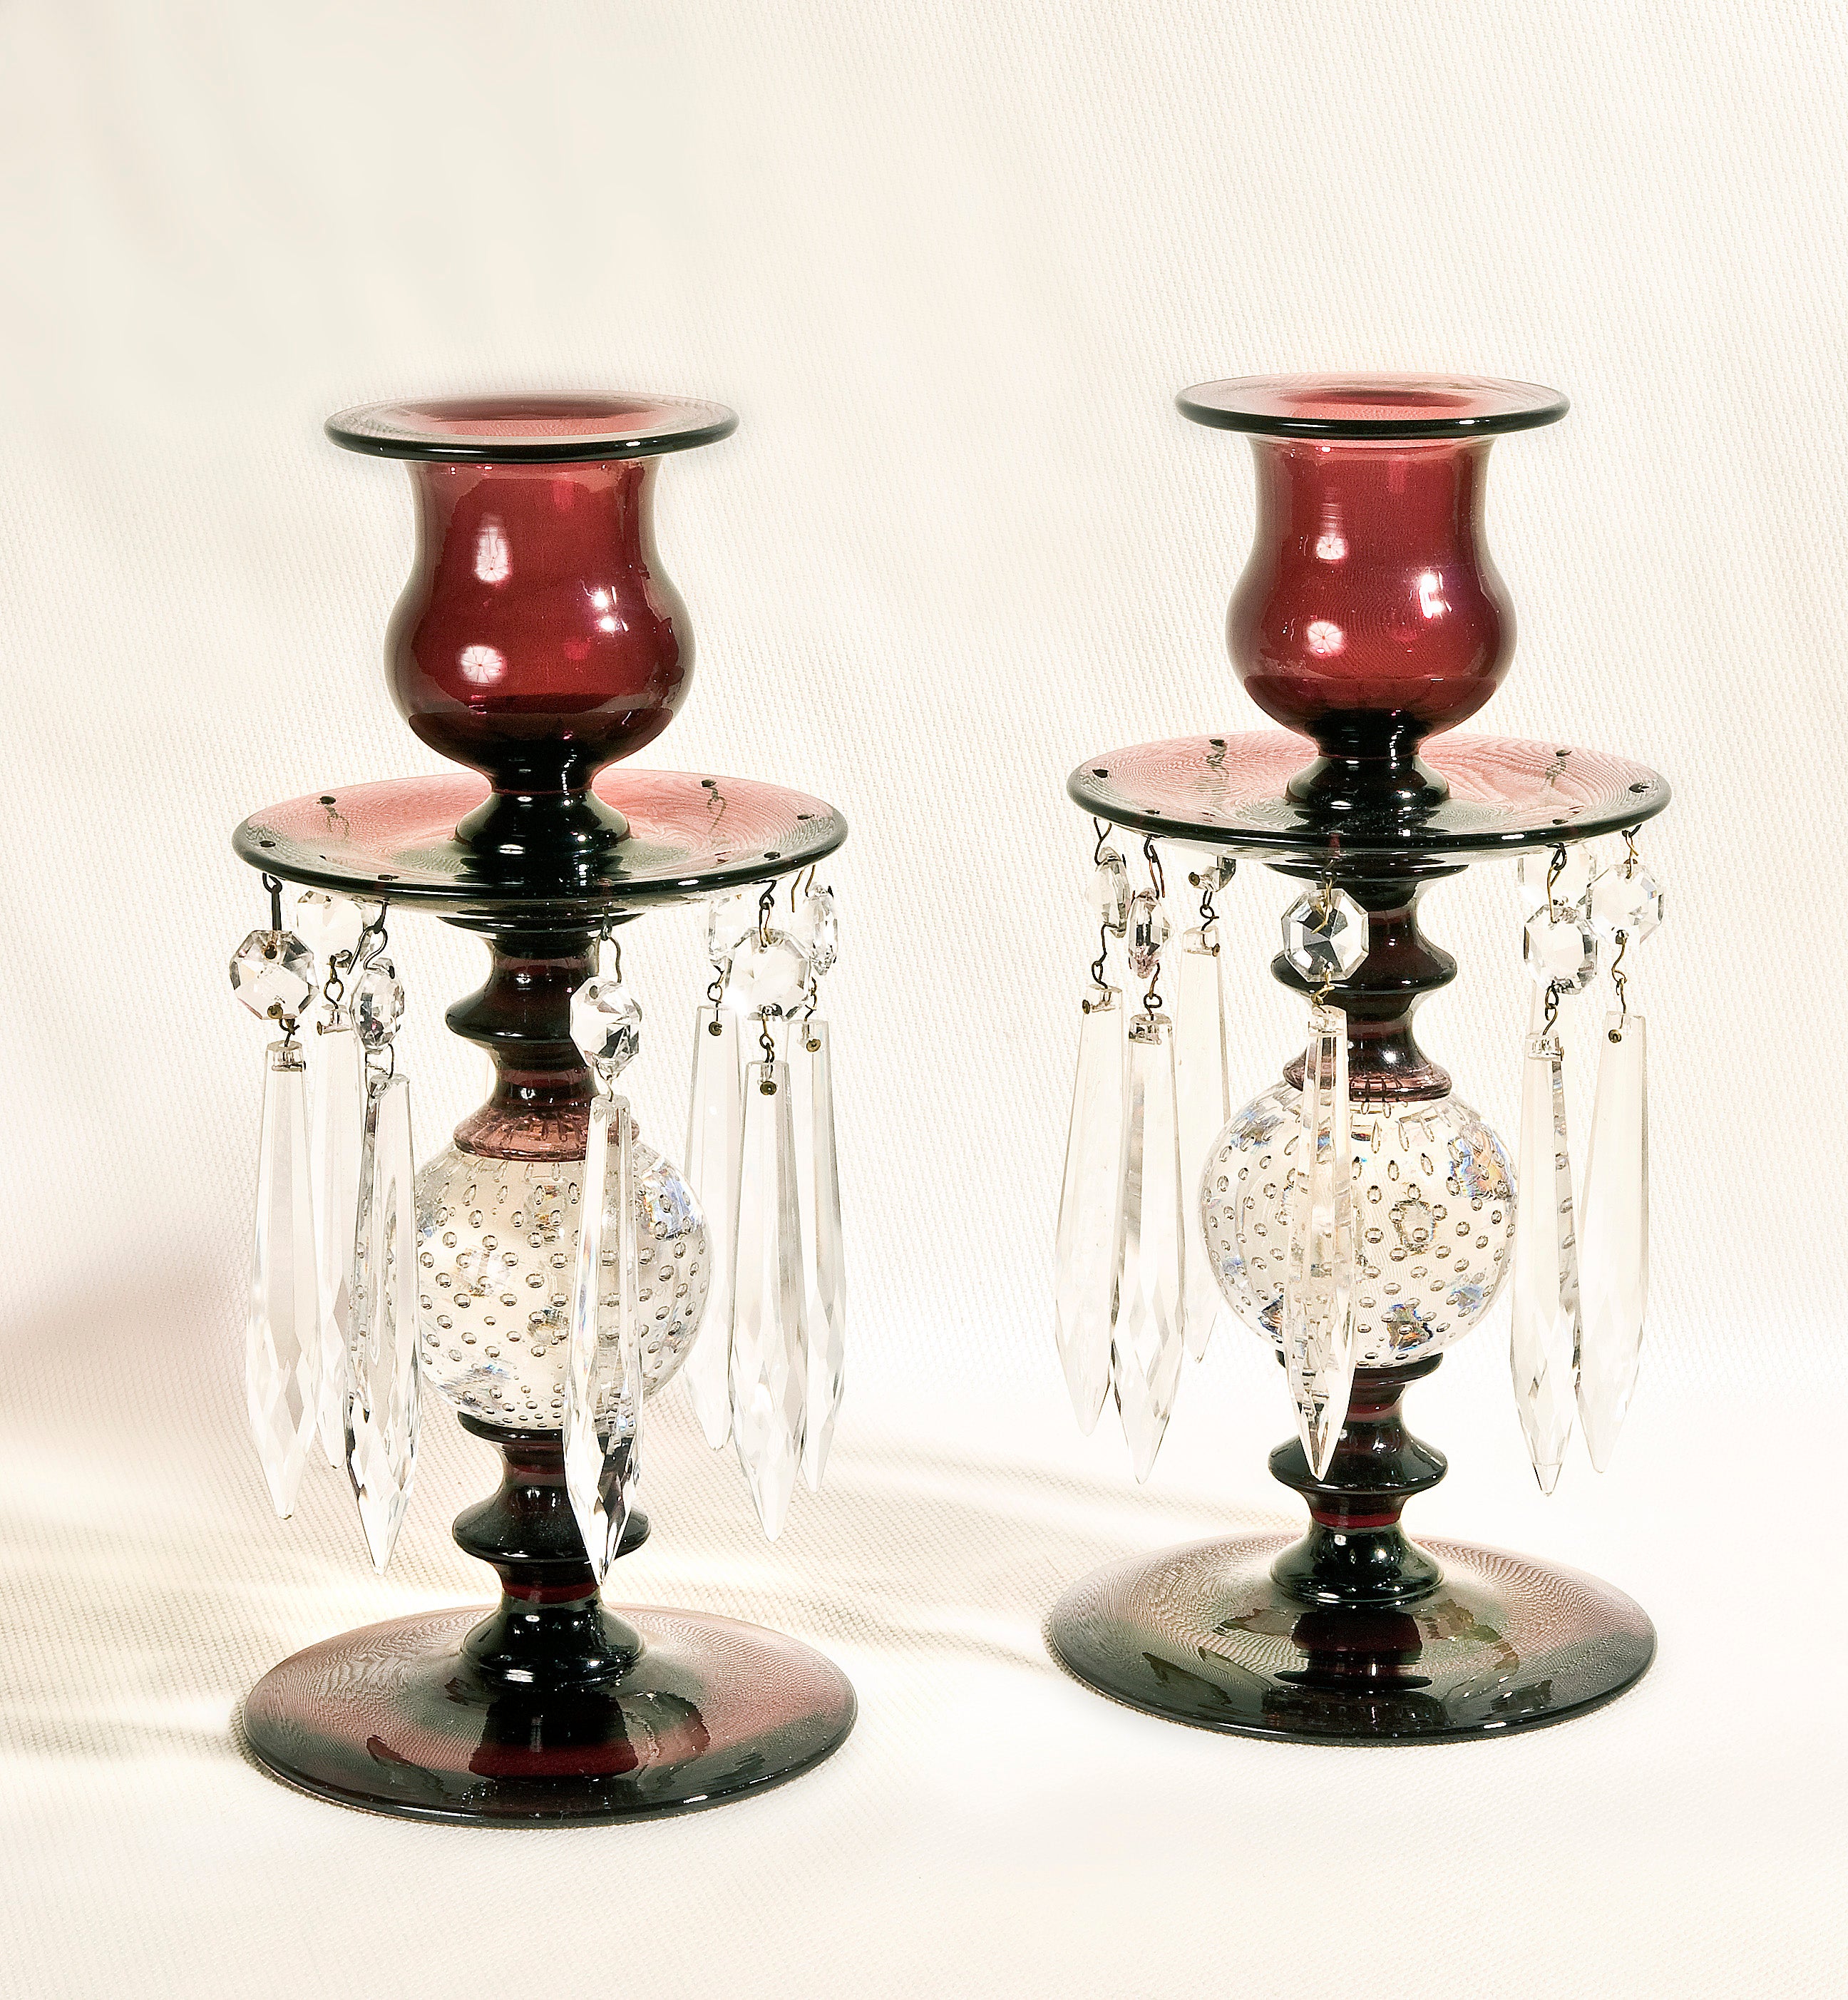 Pair of Amethyst Pairpoint Glass Candlesticks.